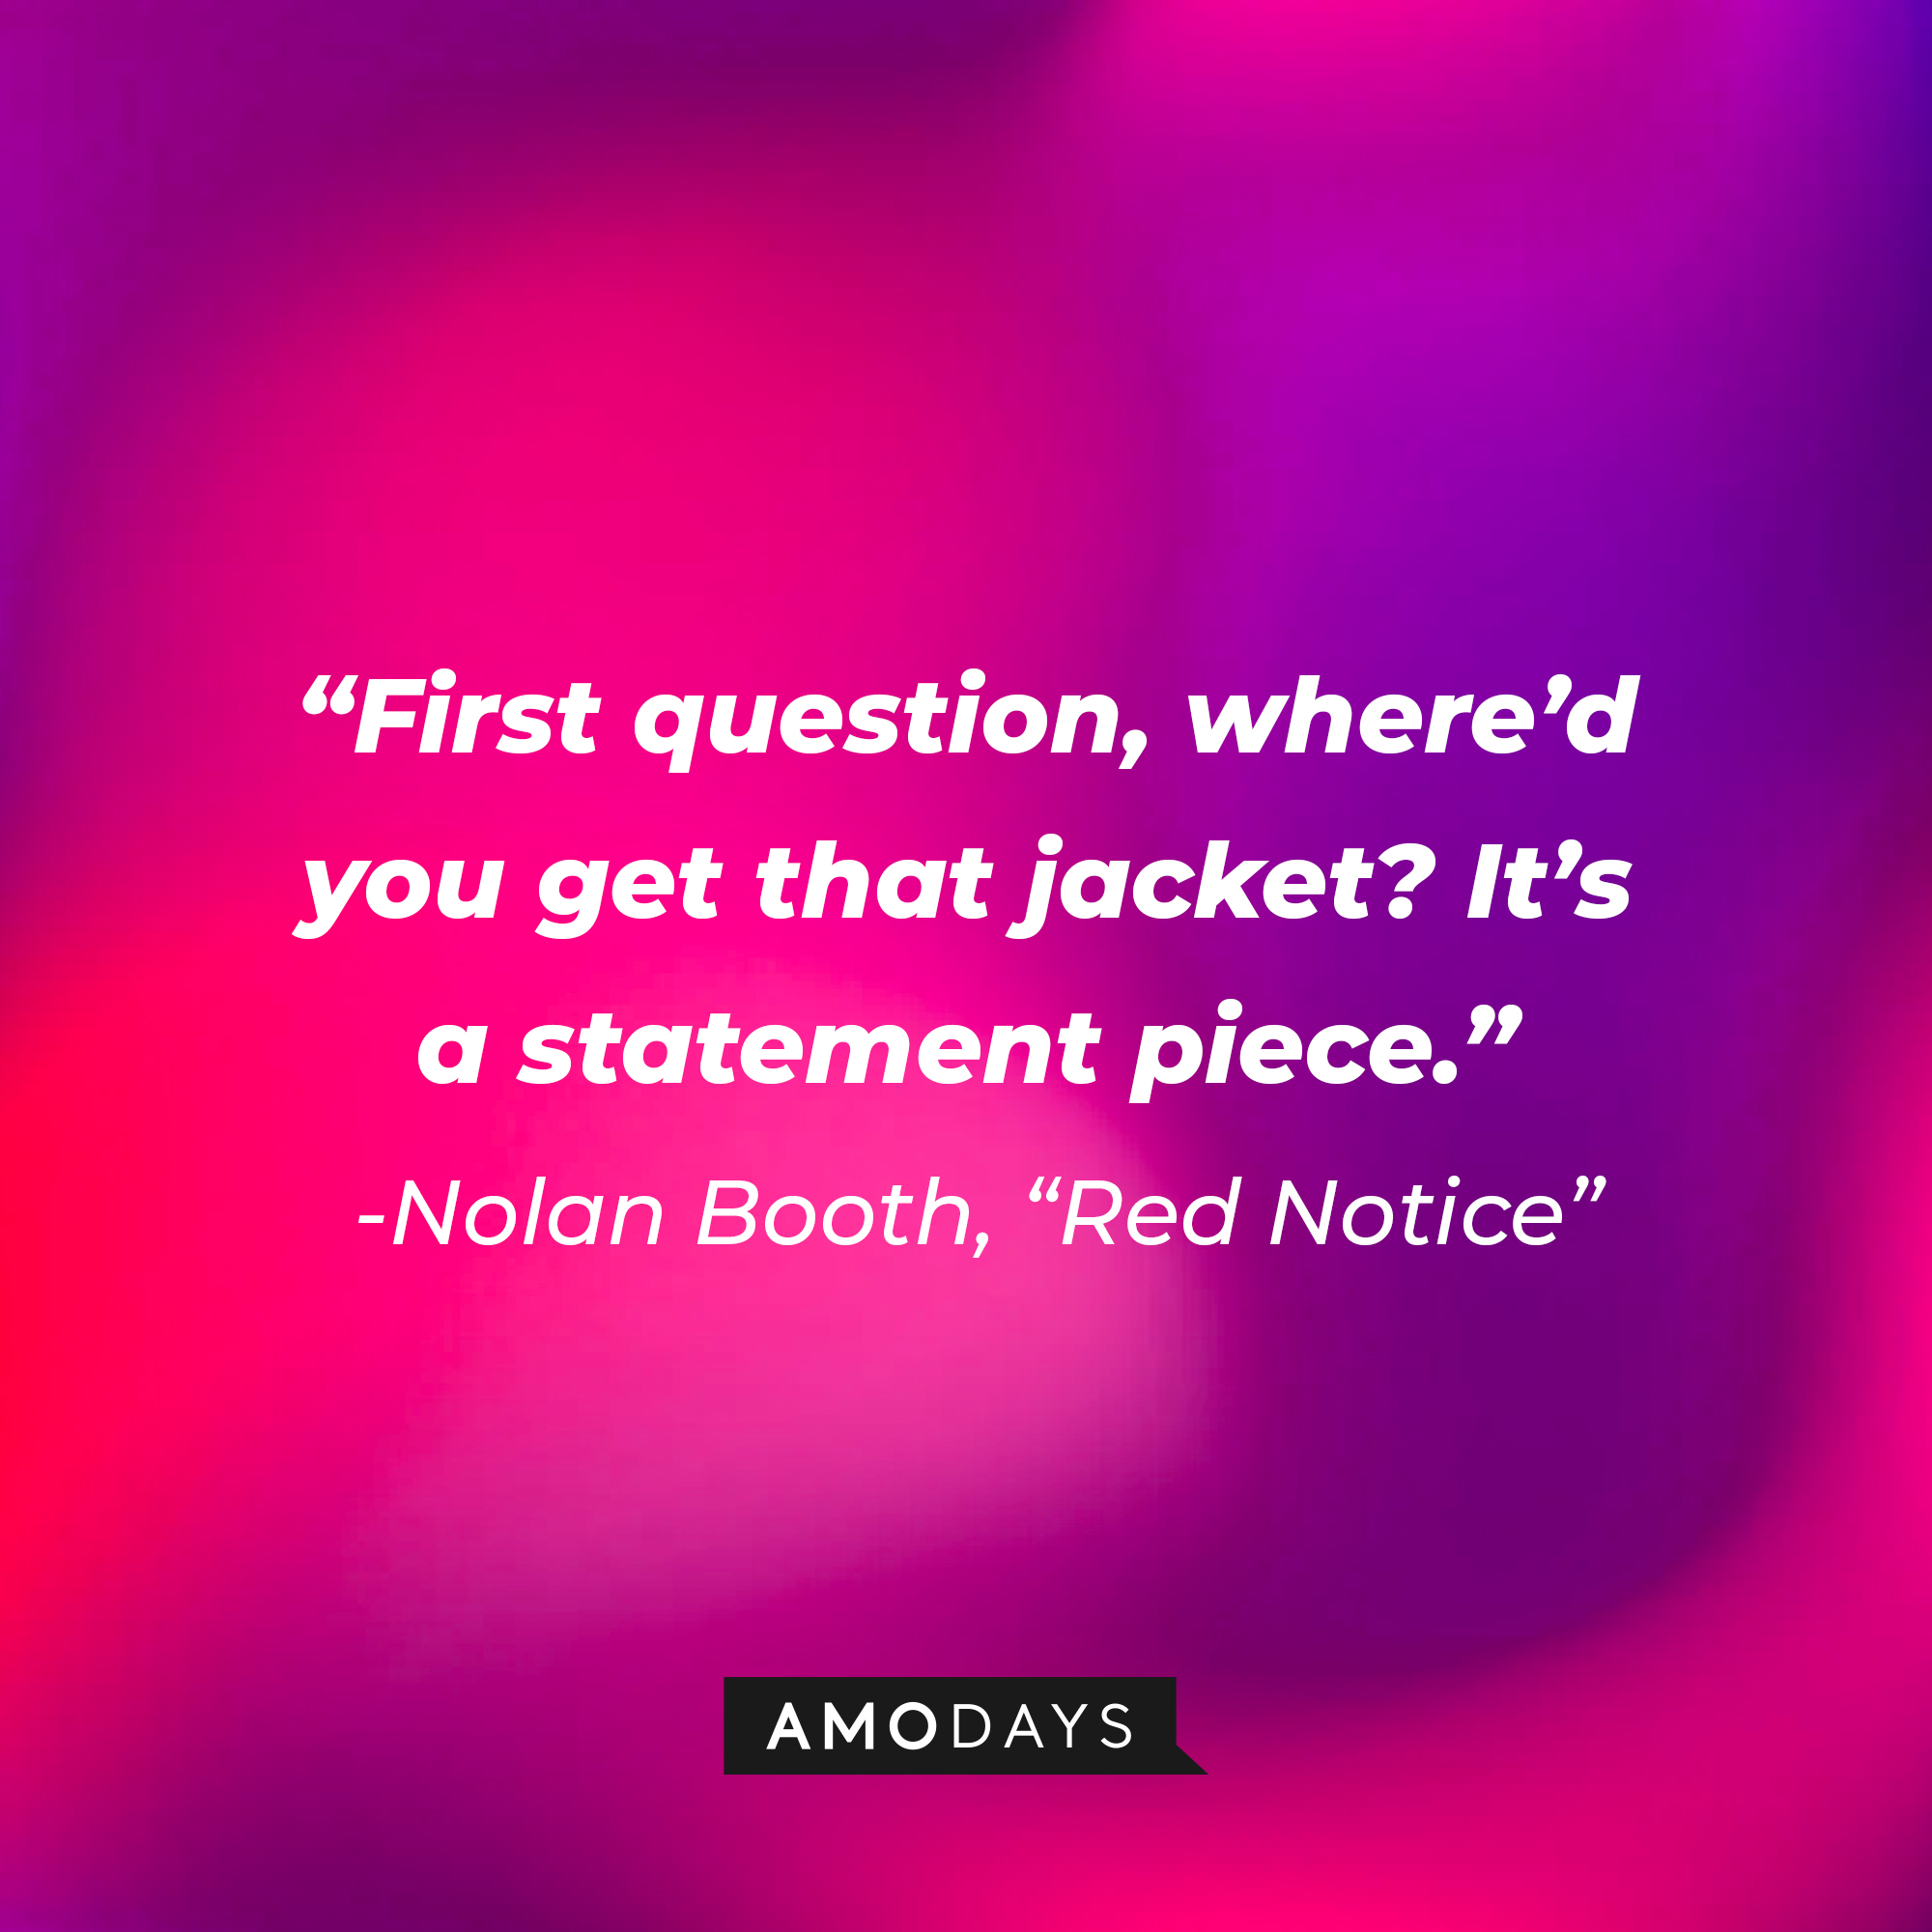 Nolan Booth's quote from "Red Notice:" “First question, where’d you get that jacket? It’s a statement piece.” | Source: AmoDays